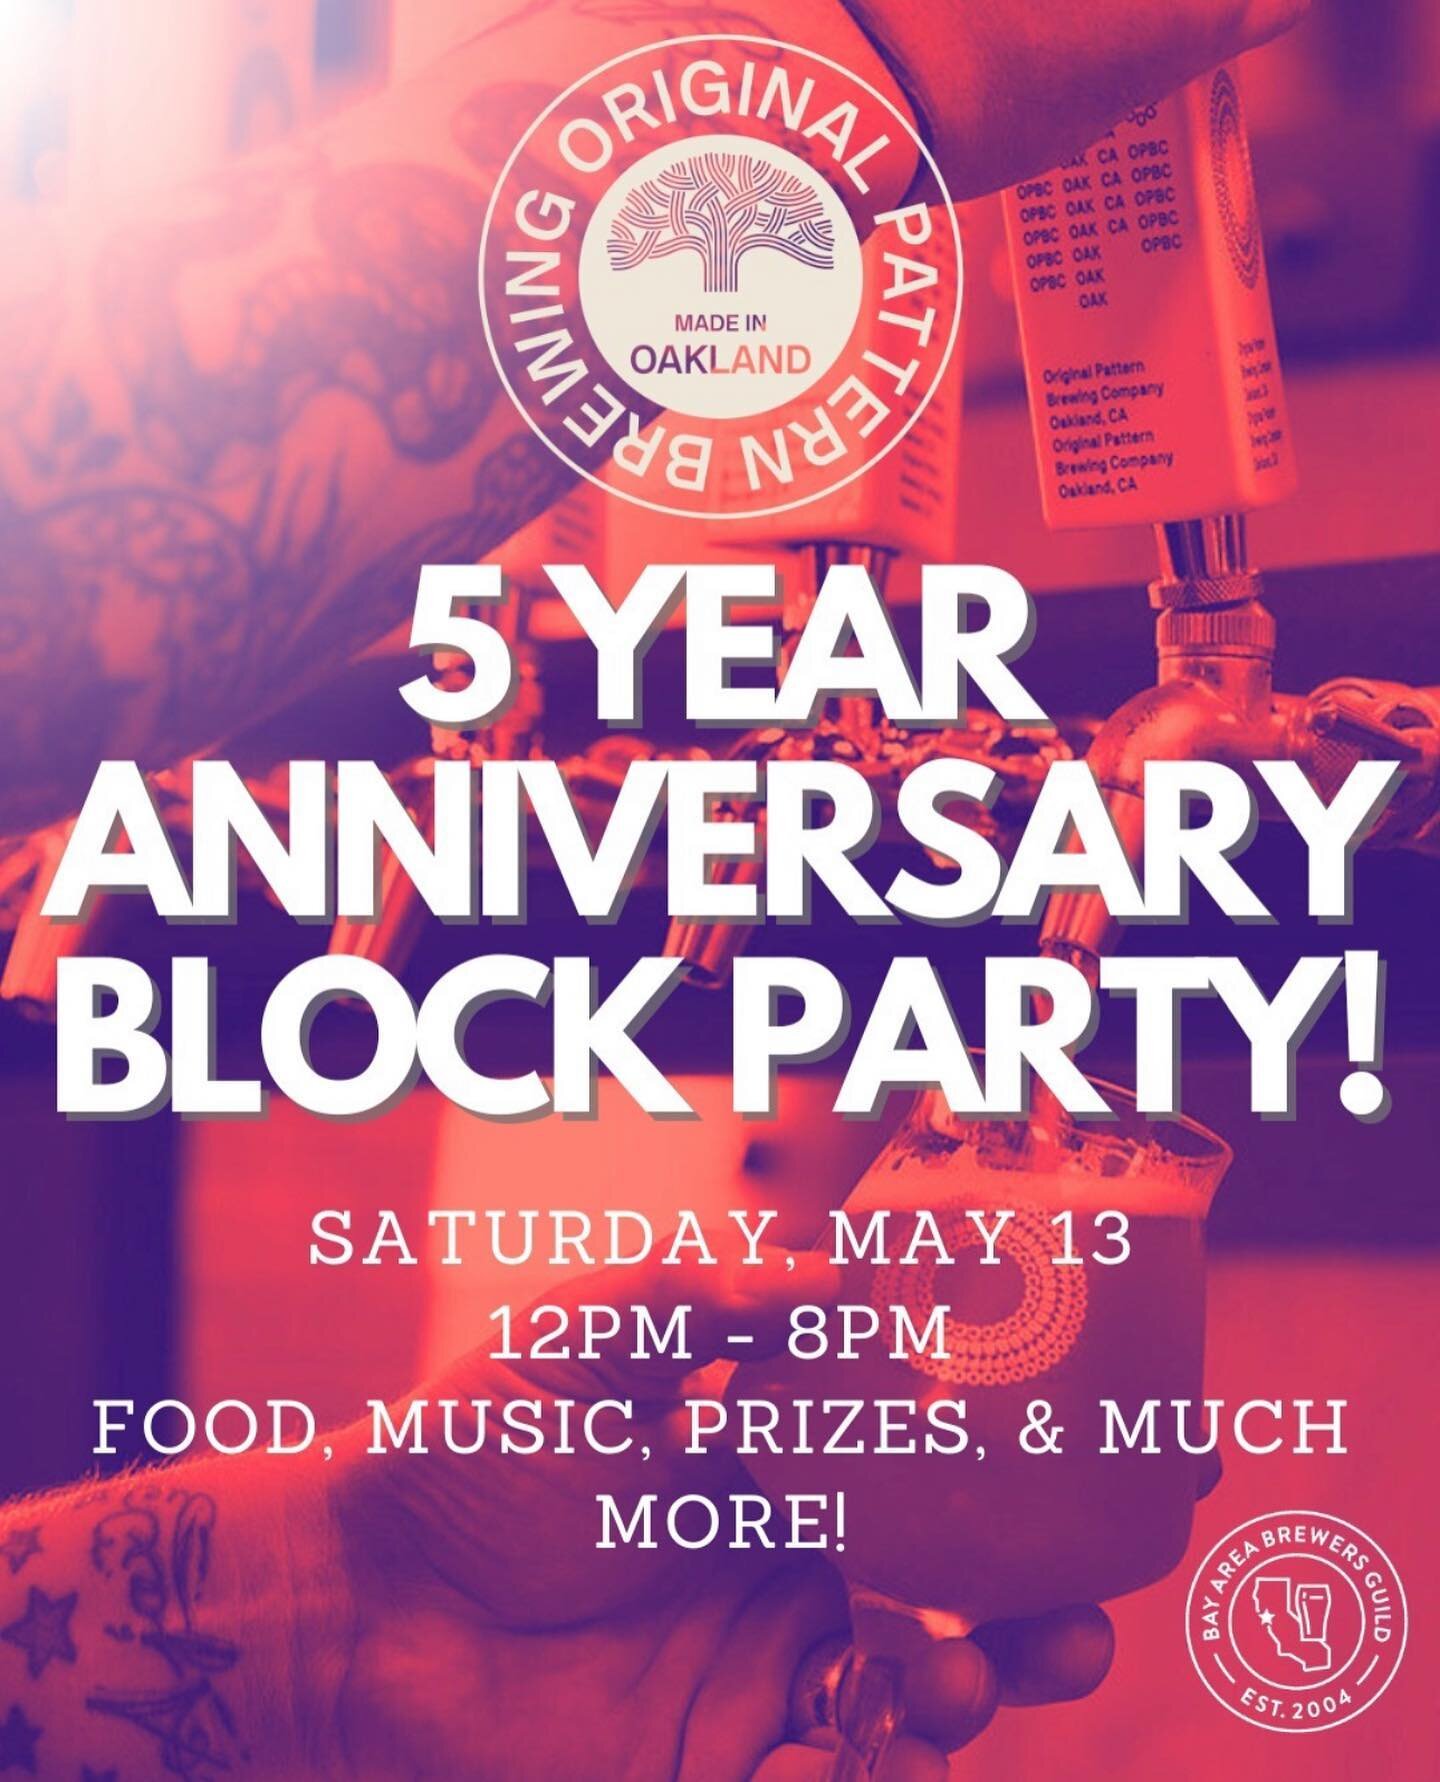 Tomorrow is Original Pattern&rsquo;s 5 Year Anniversary Block Party! 🍻

@OriginalPattern is celebrating 5 years of making brews in Jack London from 12-8PM! Enjoy special releases, yummy food, gorgeous weather, and a chance to win prizes at this Satu